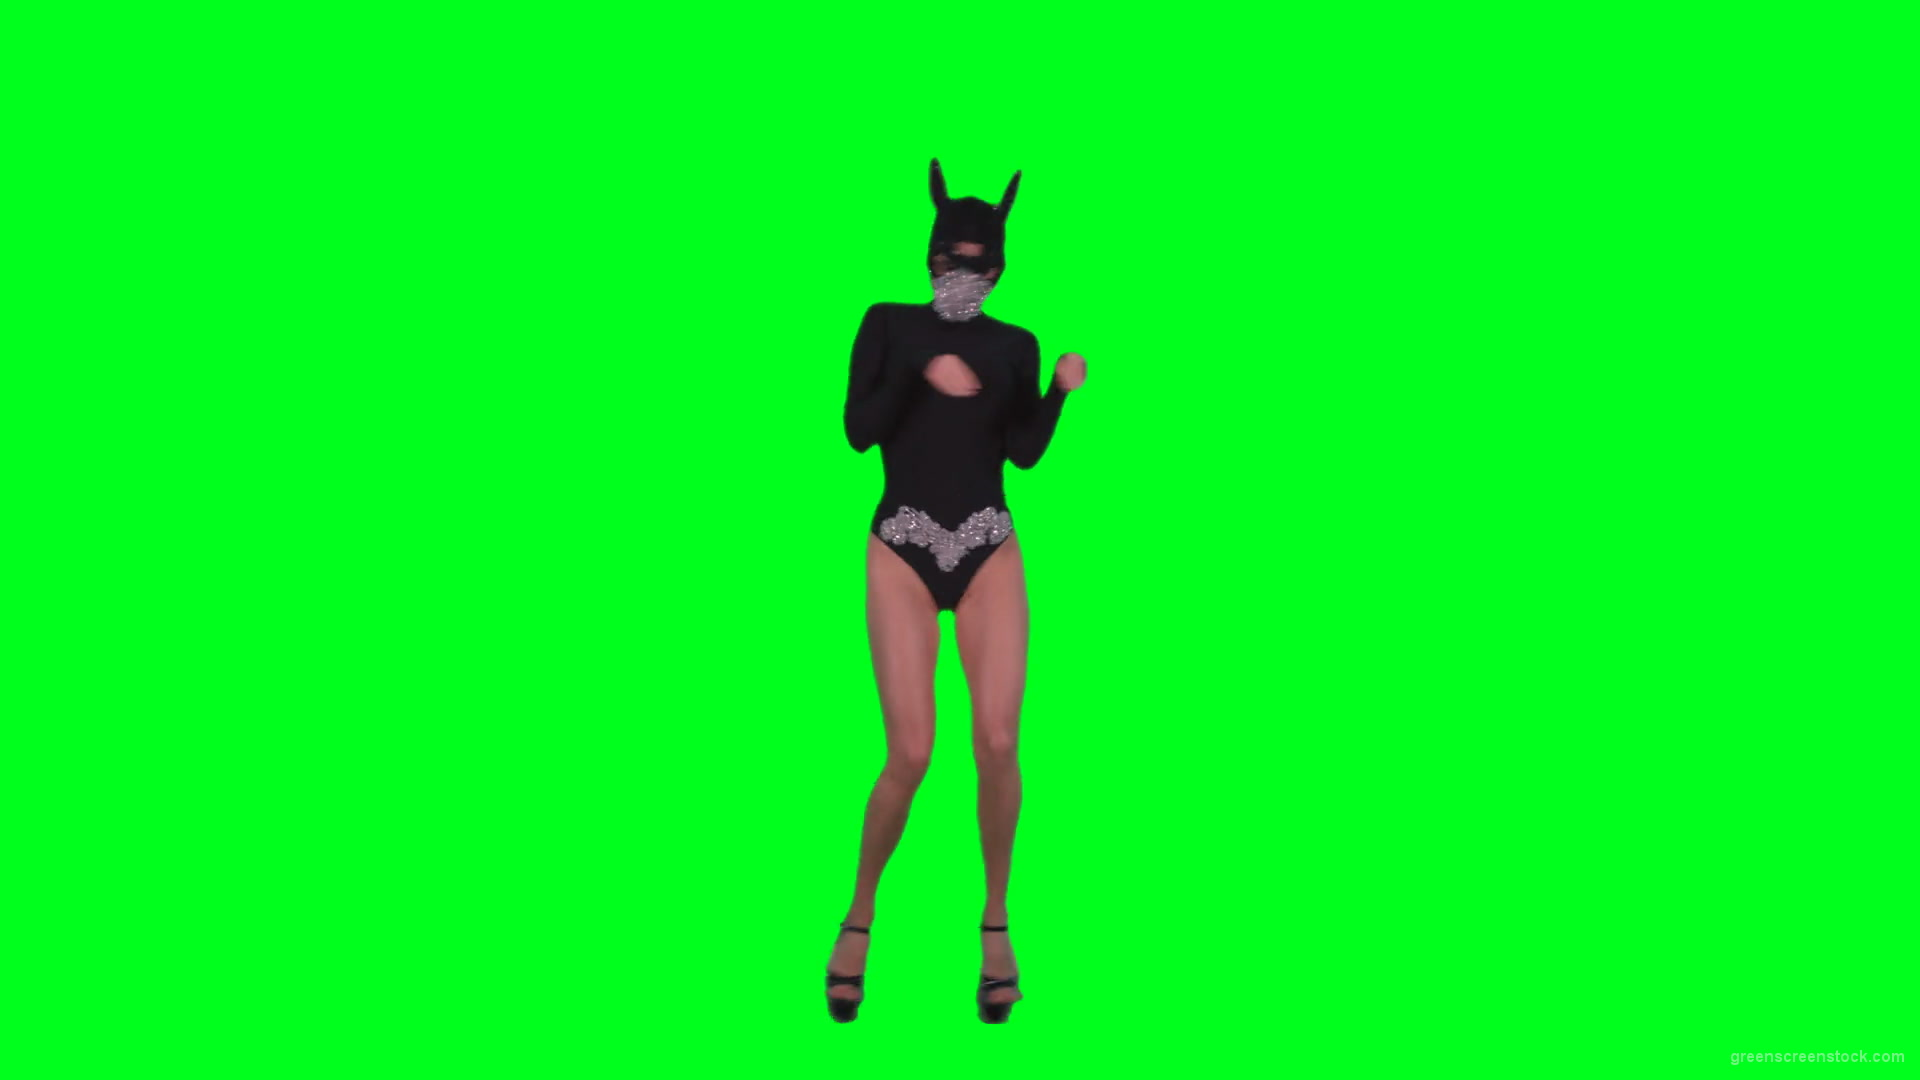 vj video background Black-Occult-Banny-Rabbit-dancing-girl-jumping-isolated-on-green-screen-4K-Video-Footage-1920_003